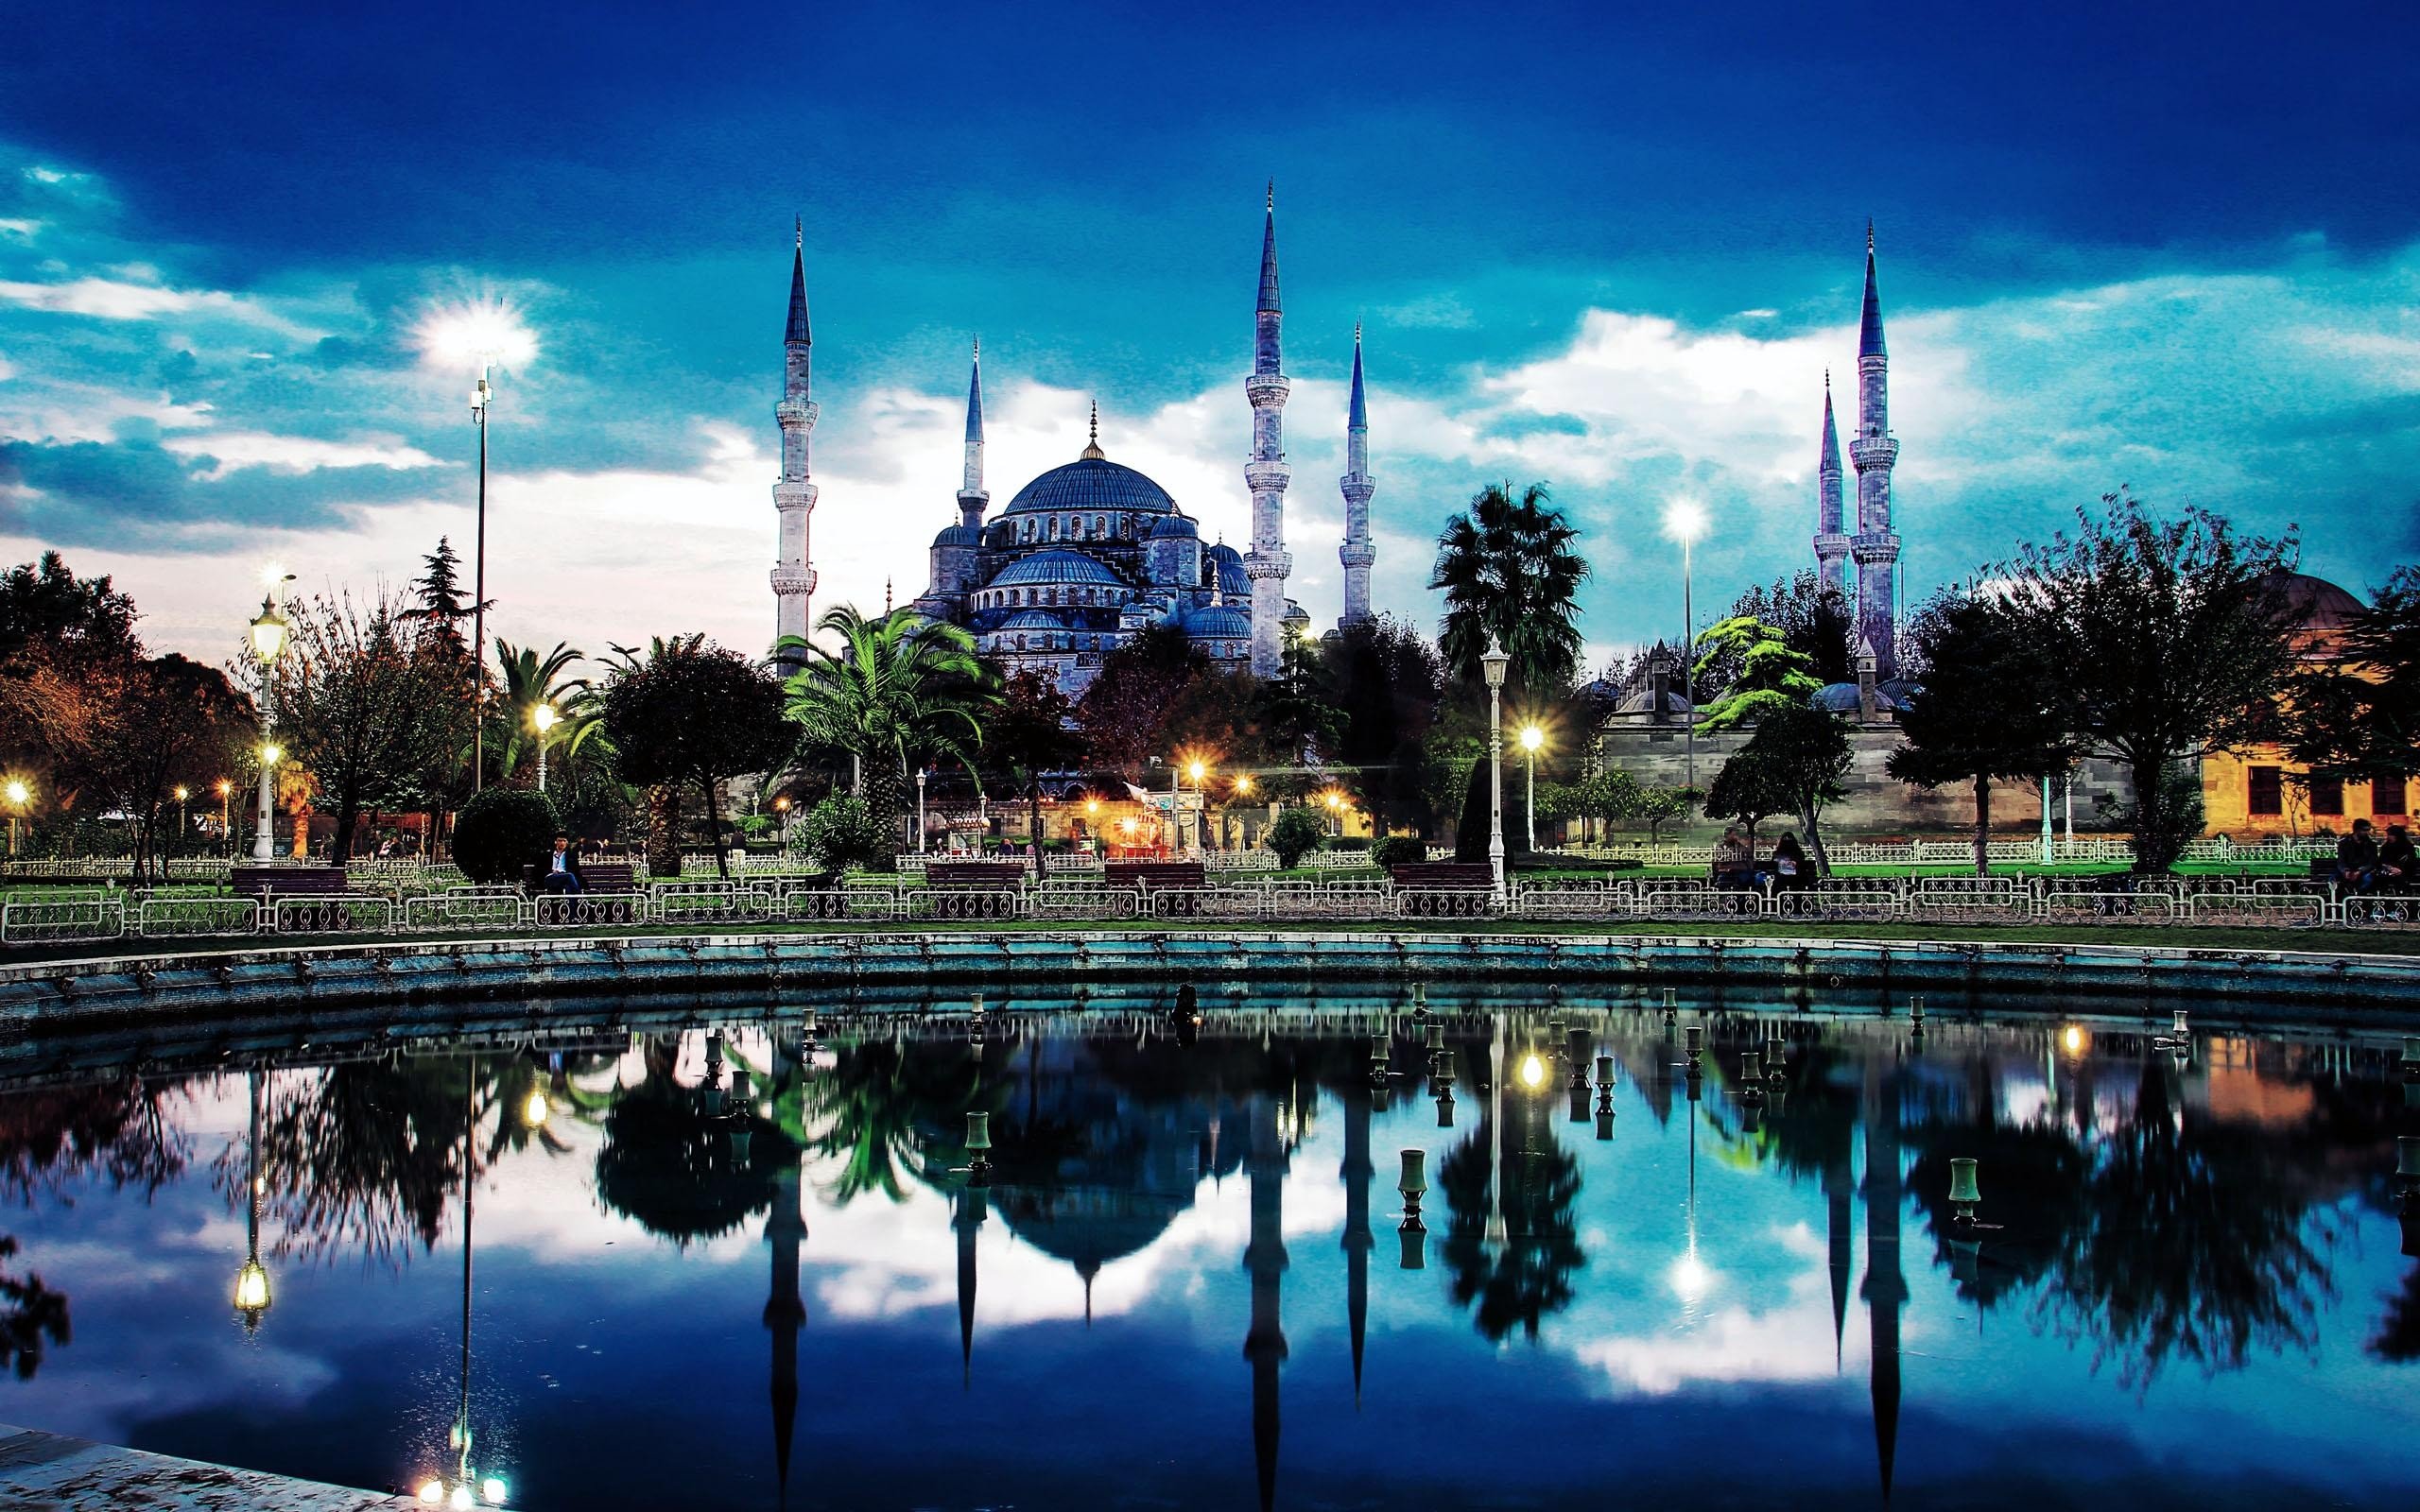 Turkey, Islamic architecture, Reflection, Sultan Ahmed Mosque, Istanbul, Mosques Wallpaper